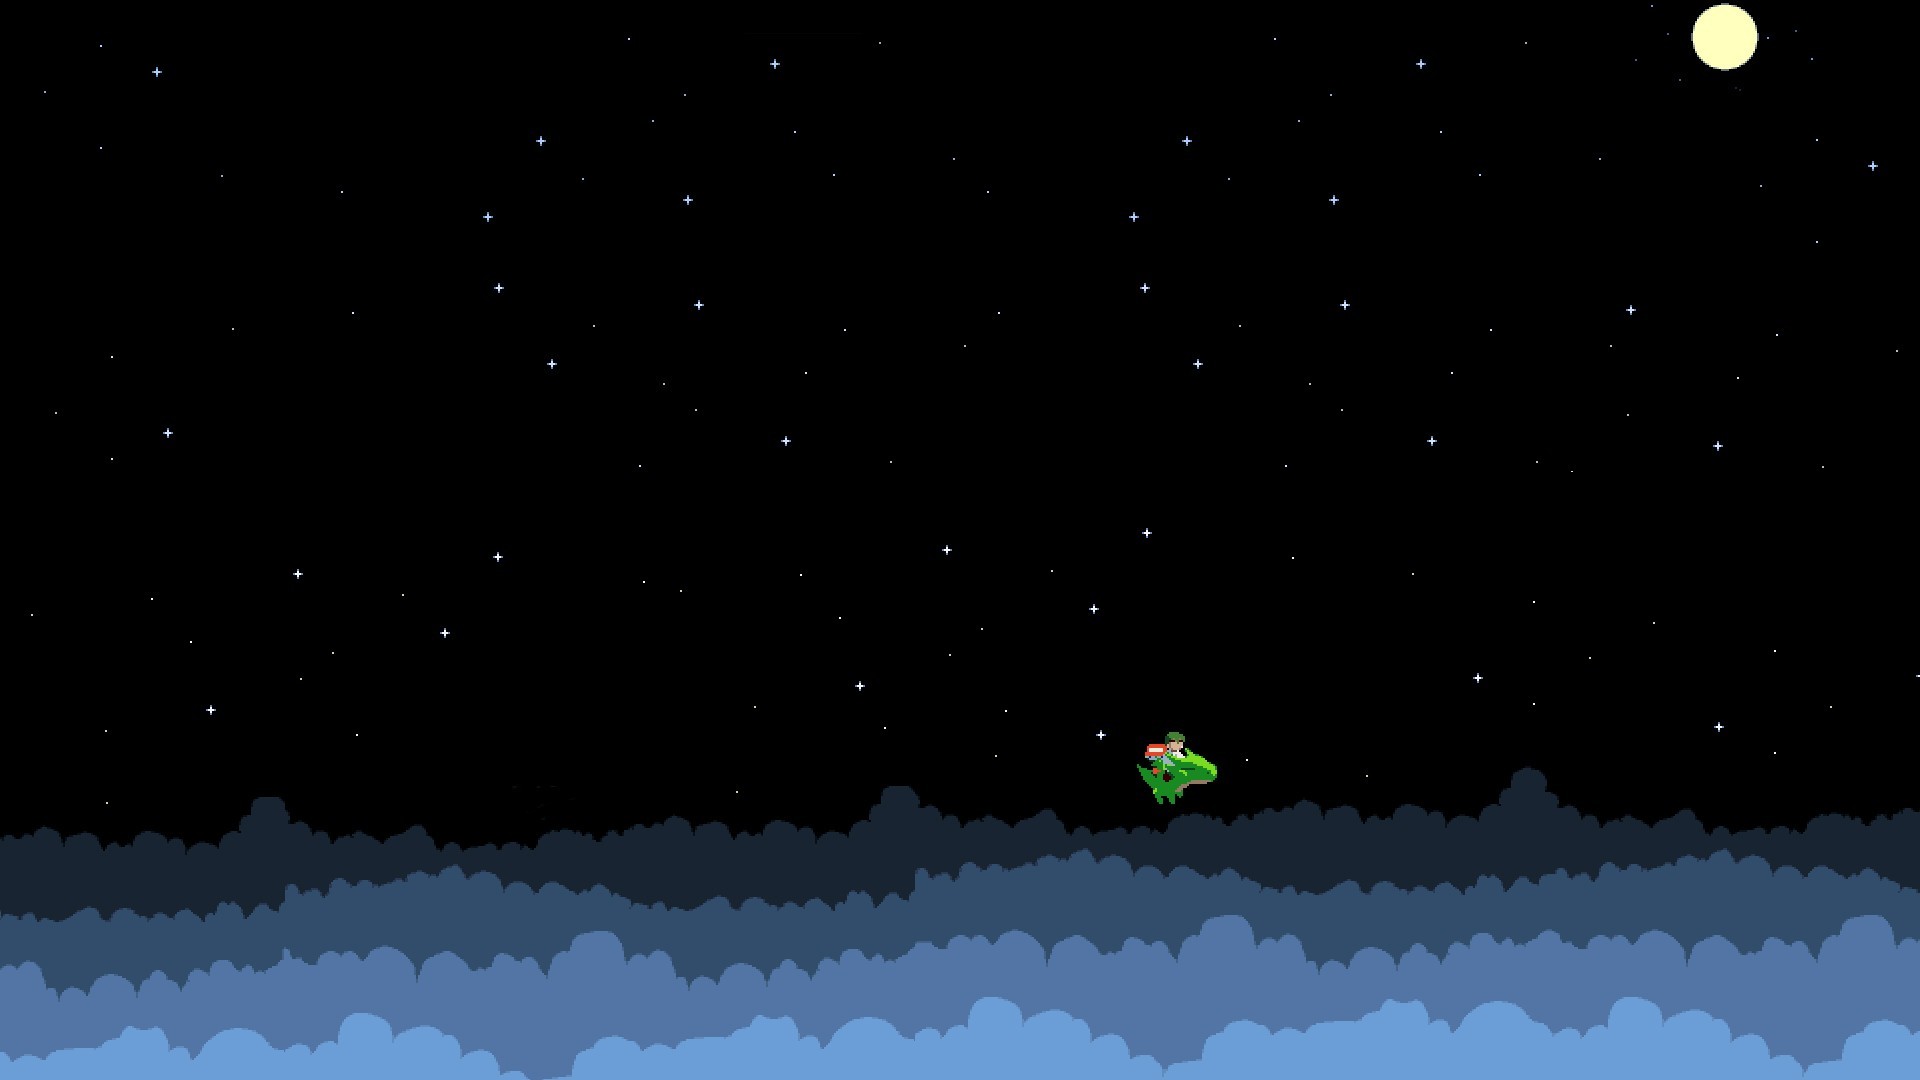 Wallpaper, video games, night, pixel art, sky, stars, clouds, Moon, dragon, pixels, moonlight, atmosphere, 8 bit, astronomy, cave story, star, darkness, screenshot, outer space, astronomical object 1920x1080